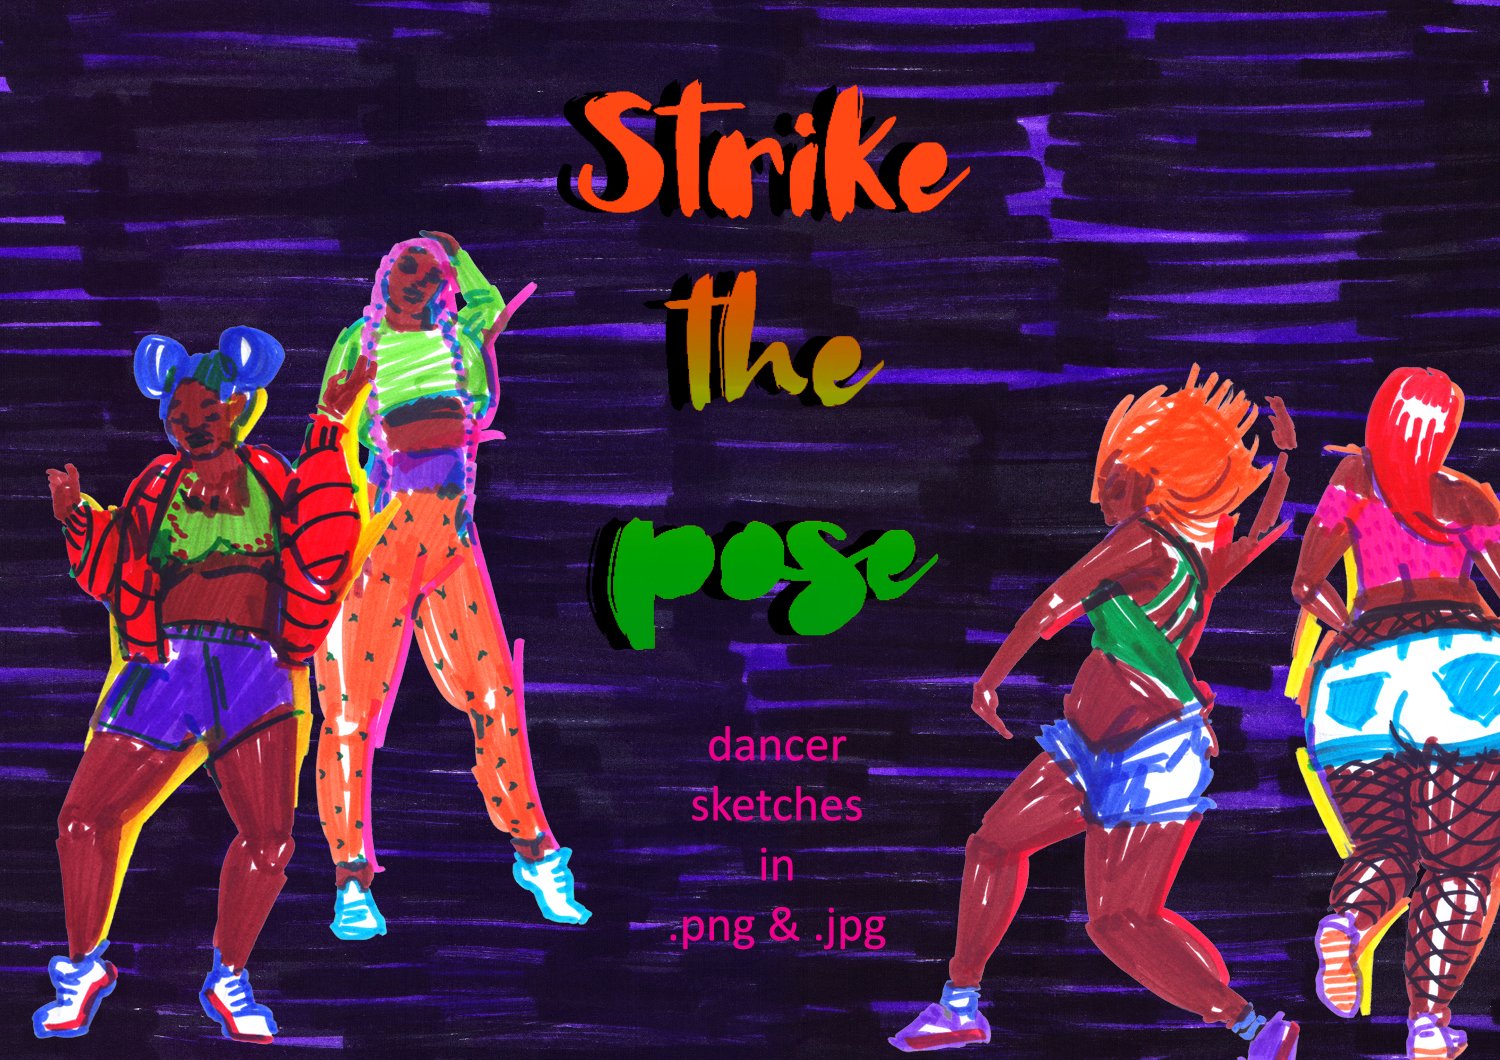 Strike the pose - dancers sketches cover image.